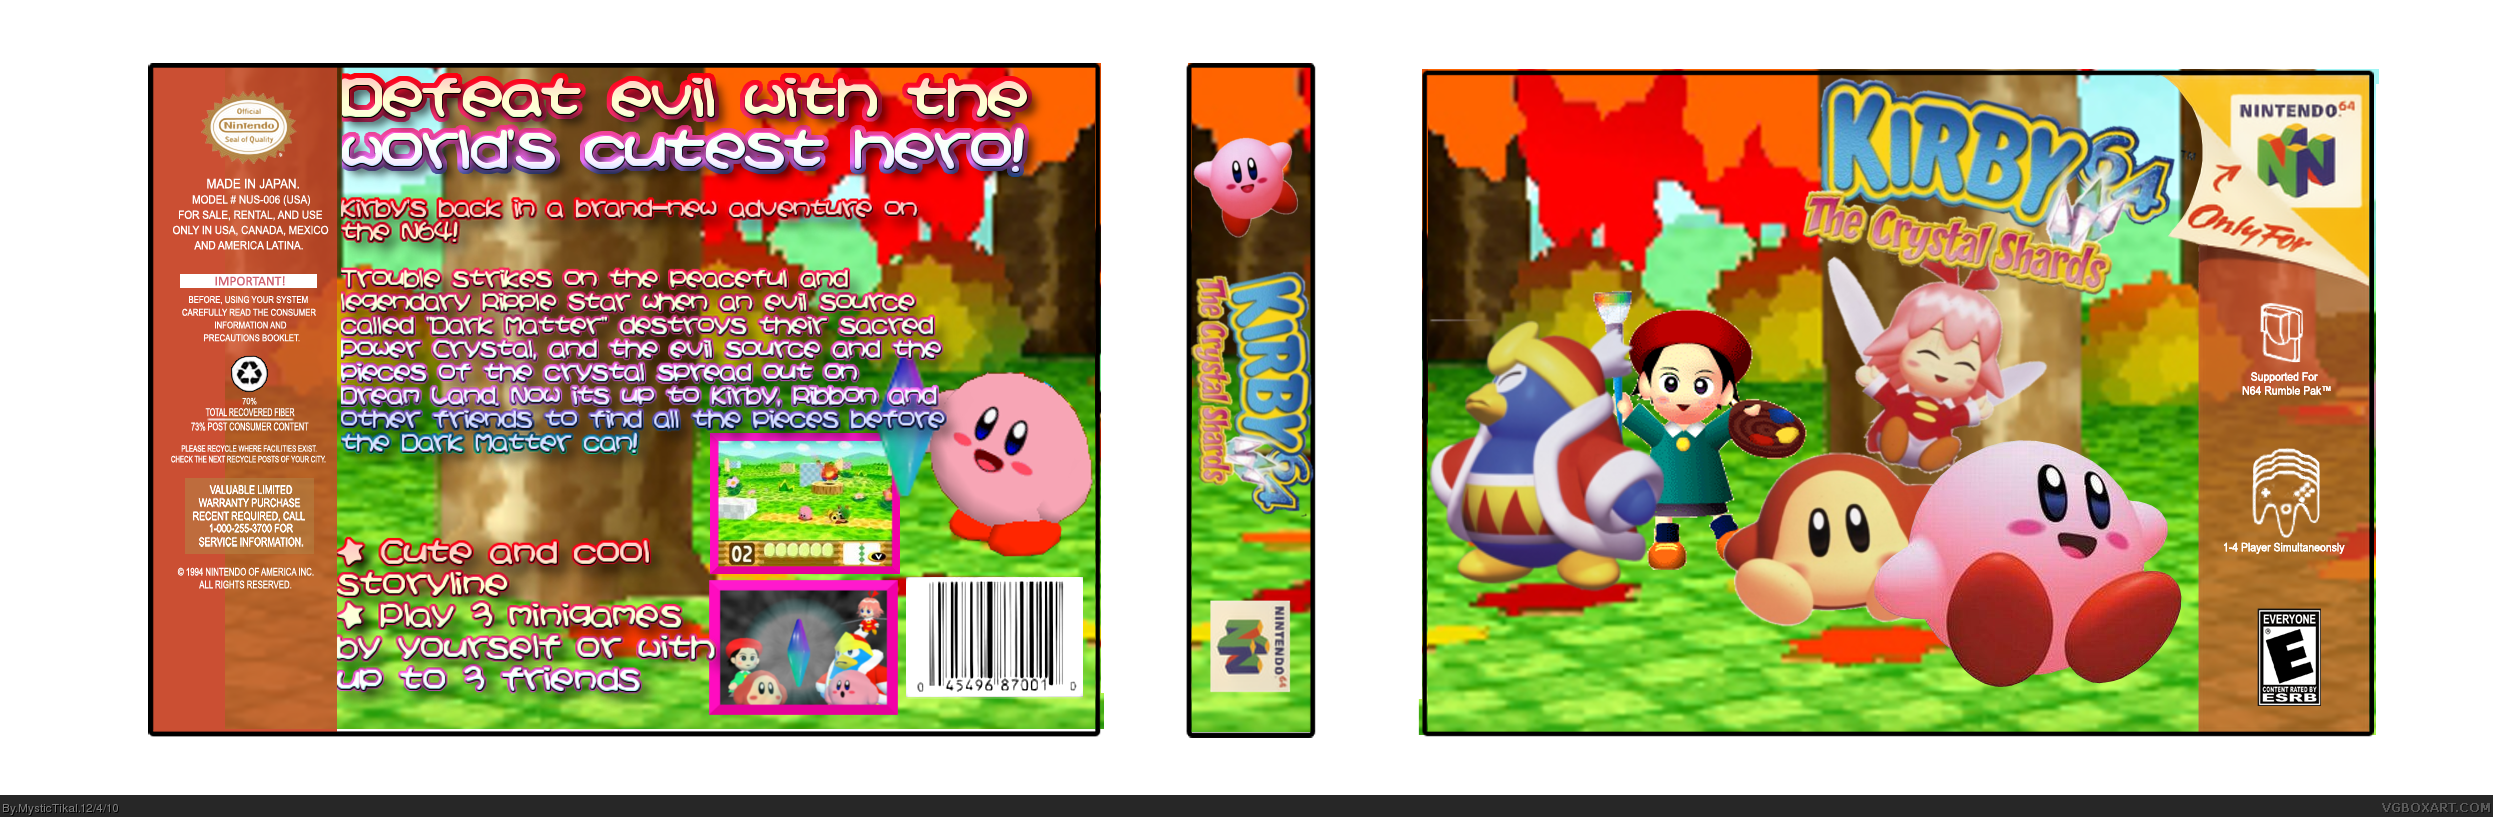 Kirby 64: The Crystal Shards box cover